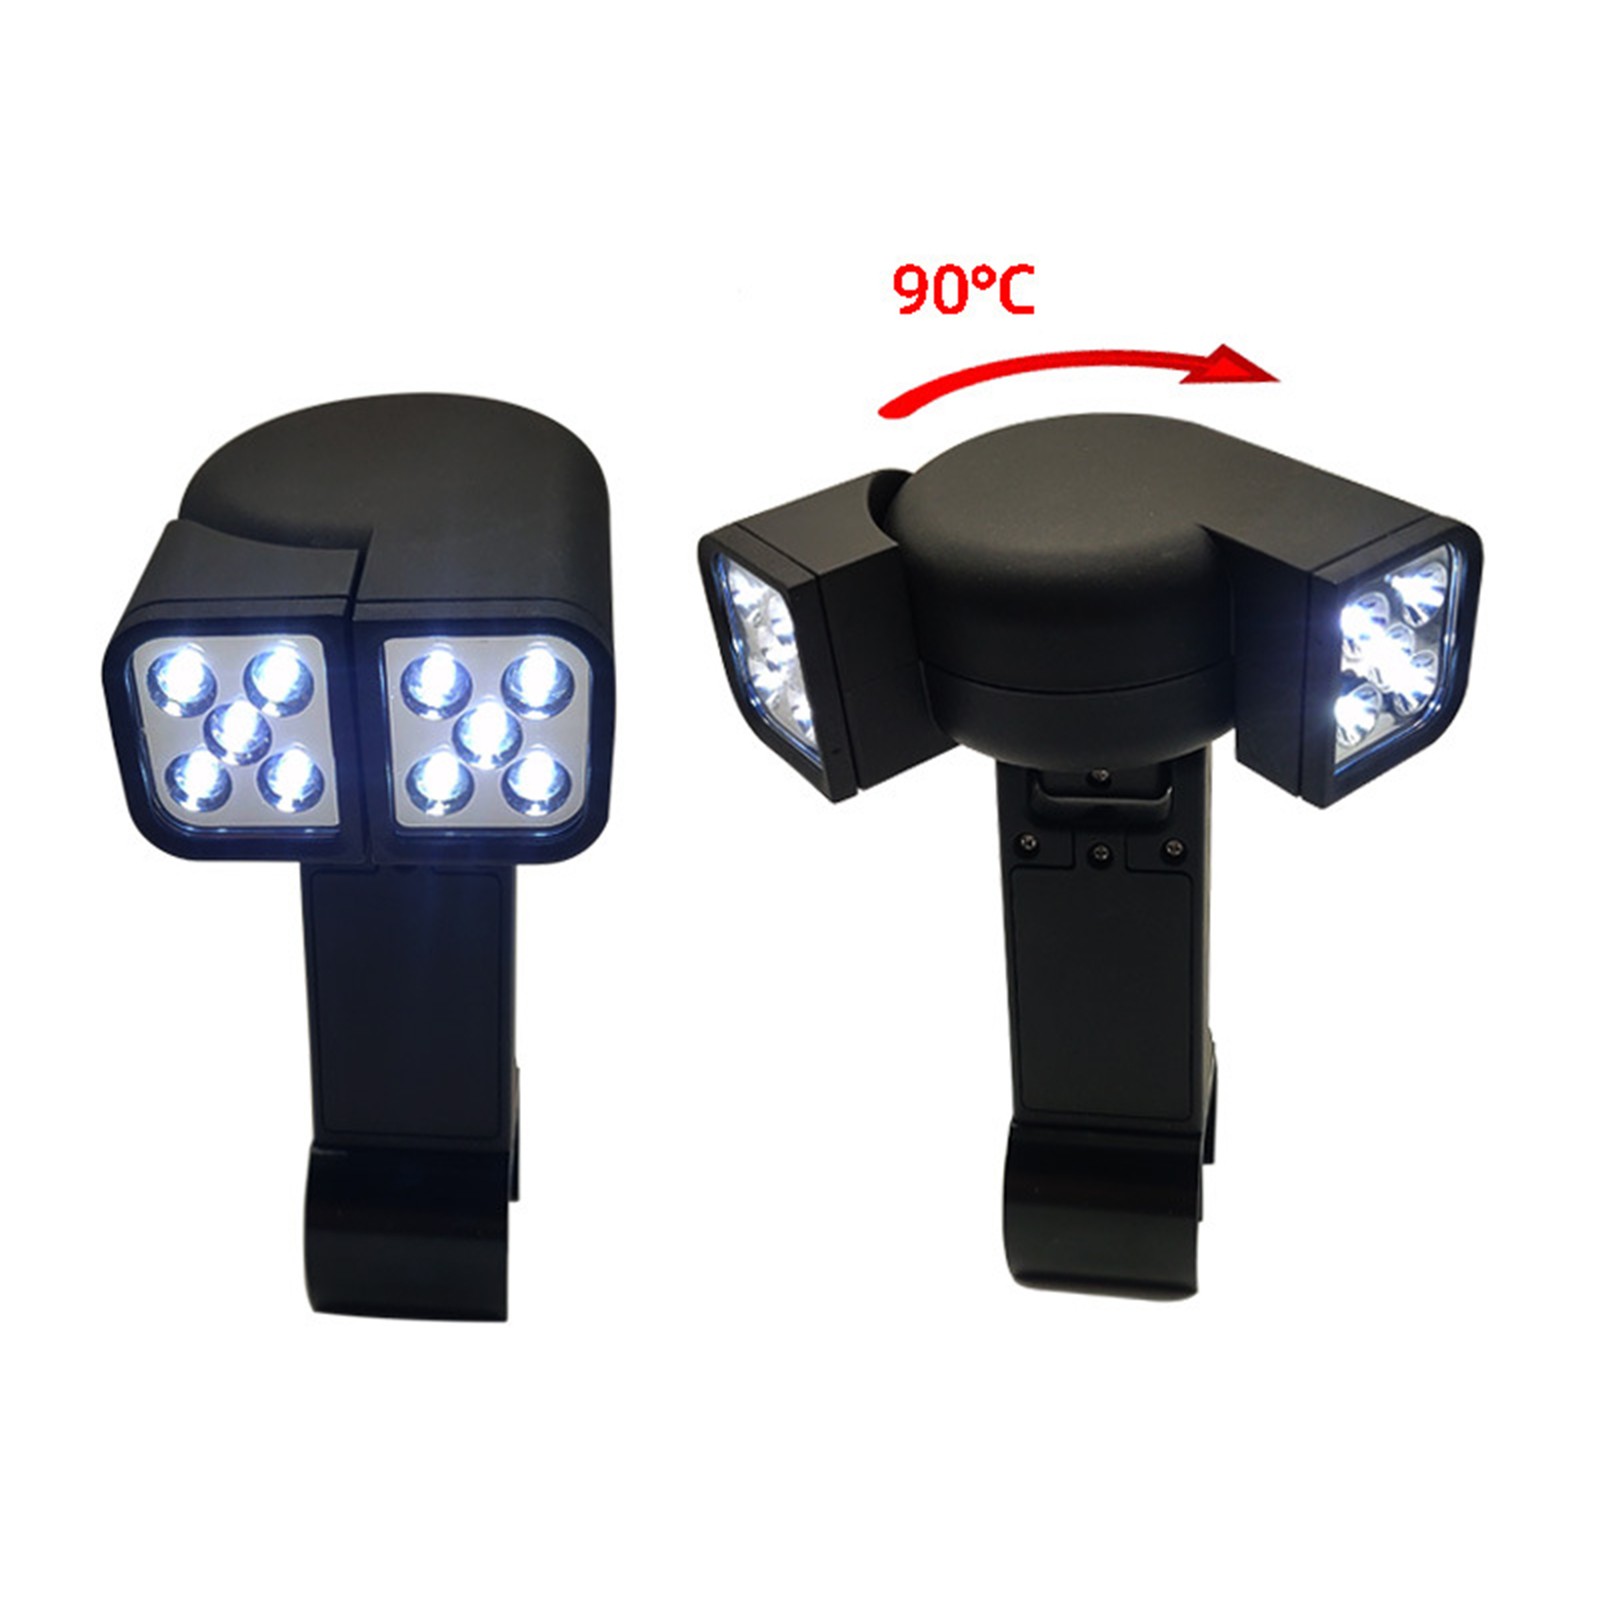 Bbq Grill Light Outdoor Super Bright LED Lamp Base Barbecue with 10 Super Bright - image 2 of 4